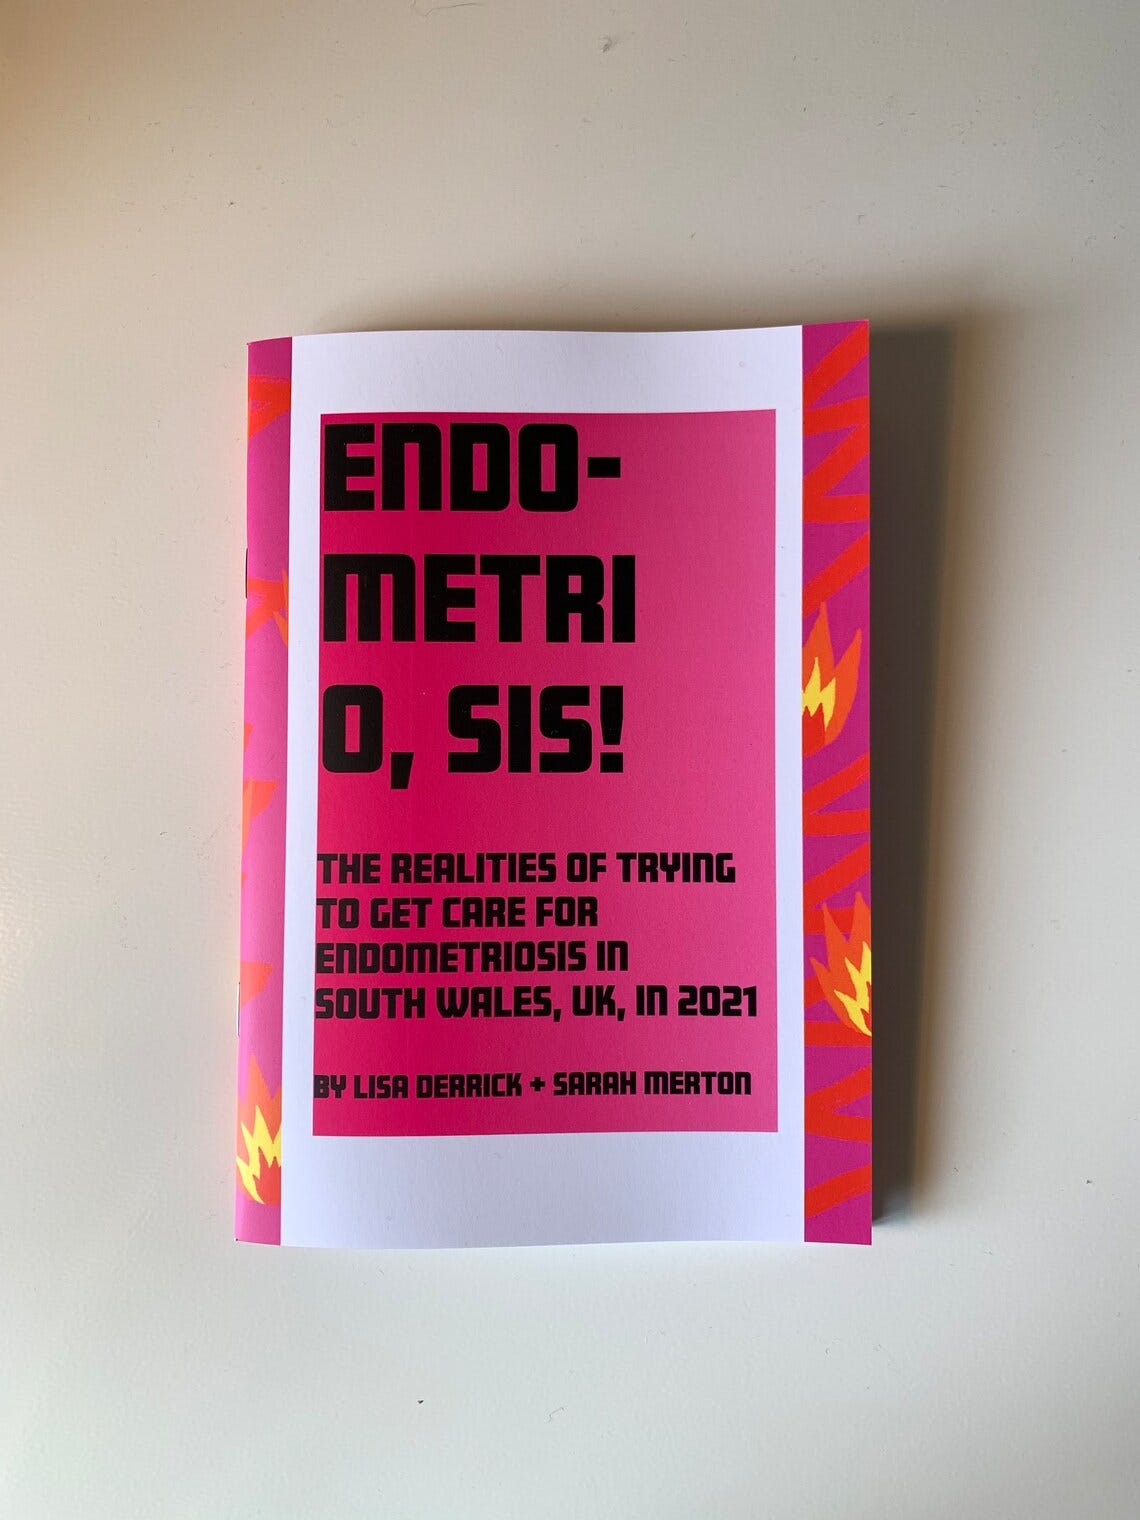 It is a picture of a zine with a bold pink cover and thick black type, the cover says, "Endometri O, Sis! The realities of trying to get care for endometriosis in South Wales, UK, in 2021."